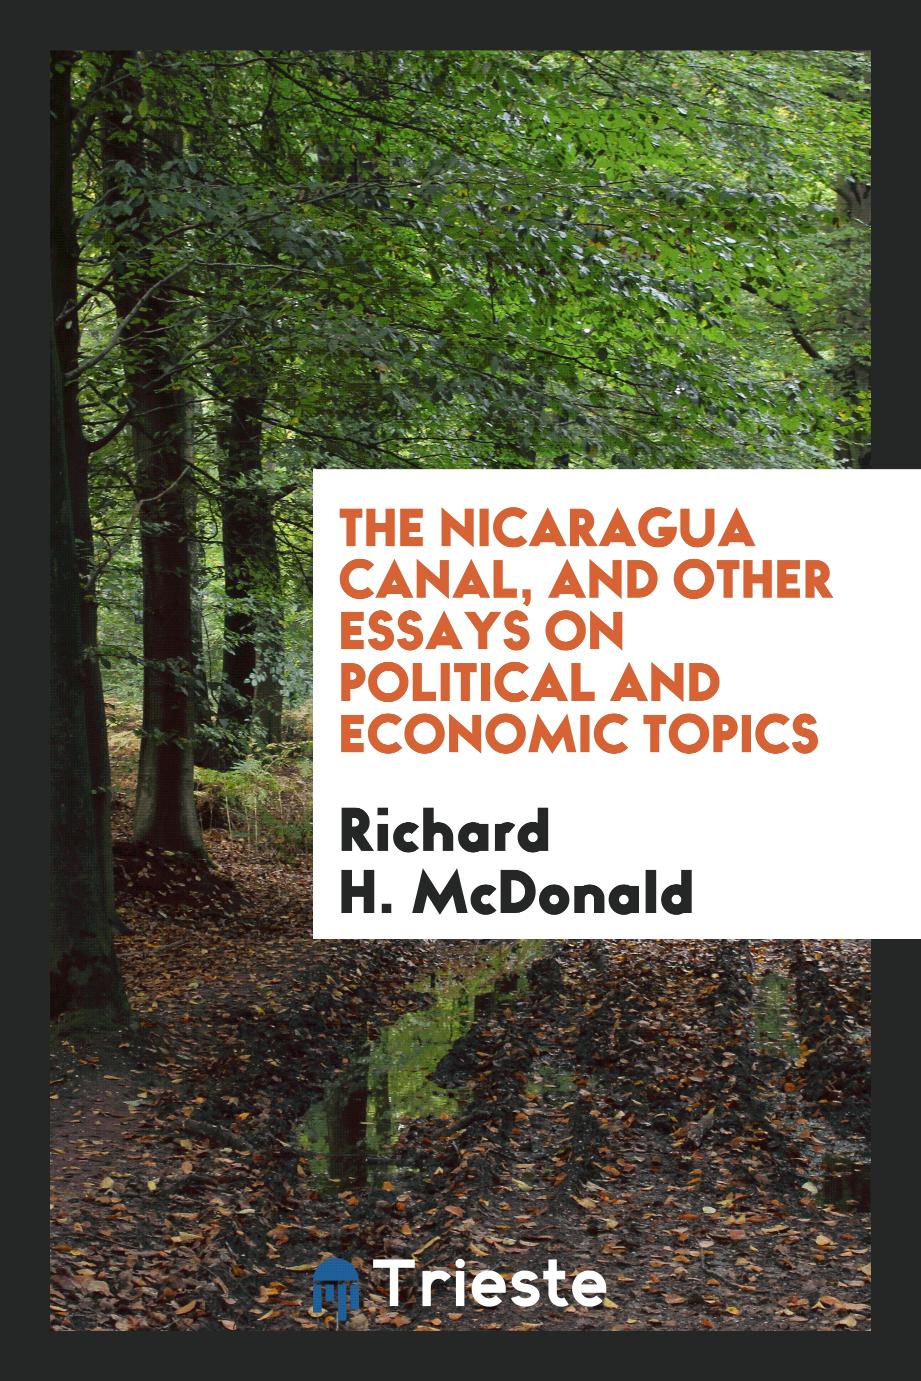 The Nicaragua Canal, and Other Essays on Political and Economic Topics